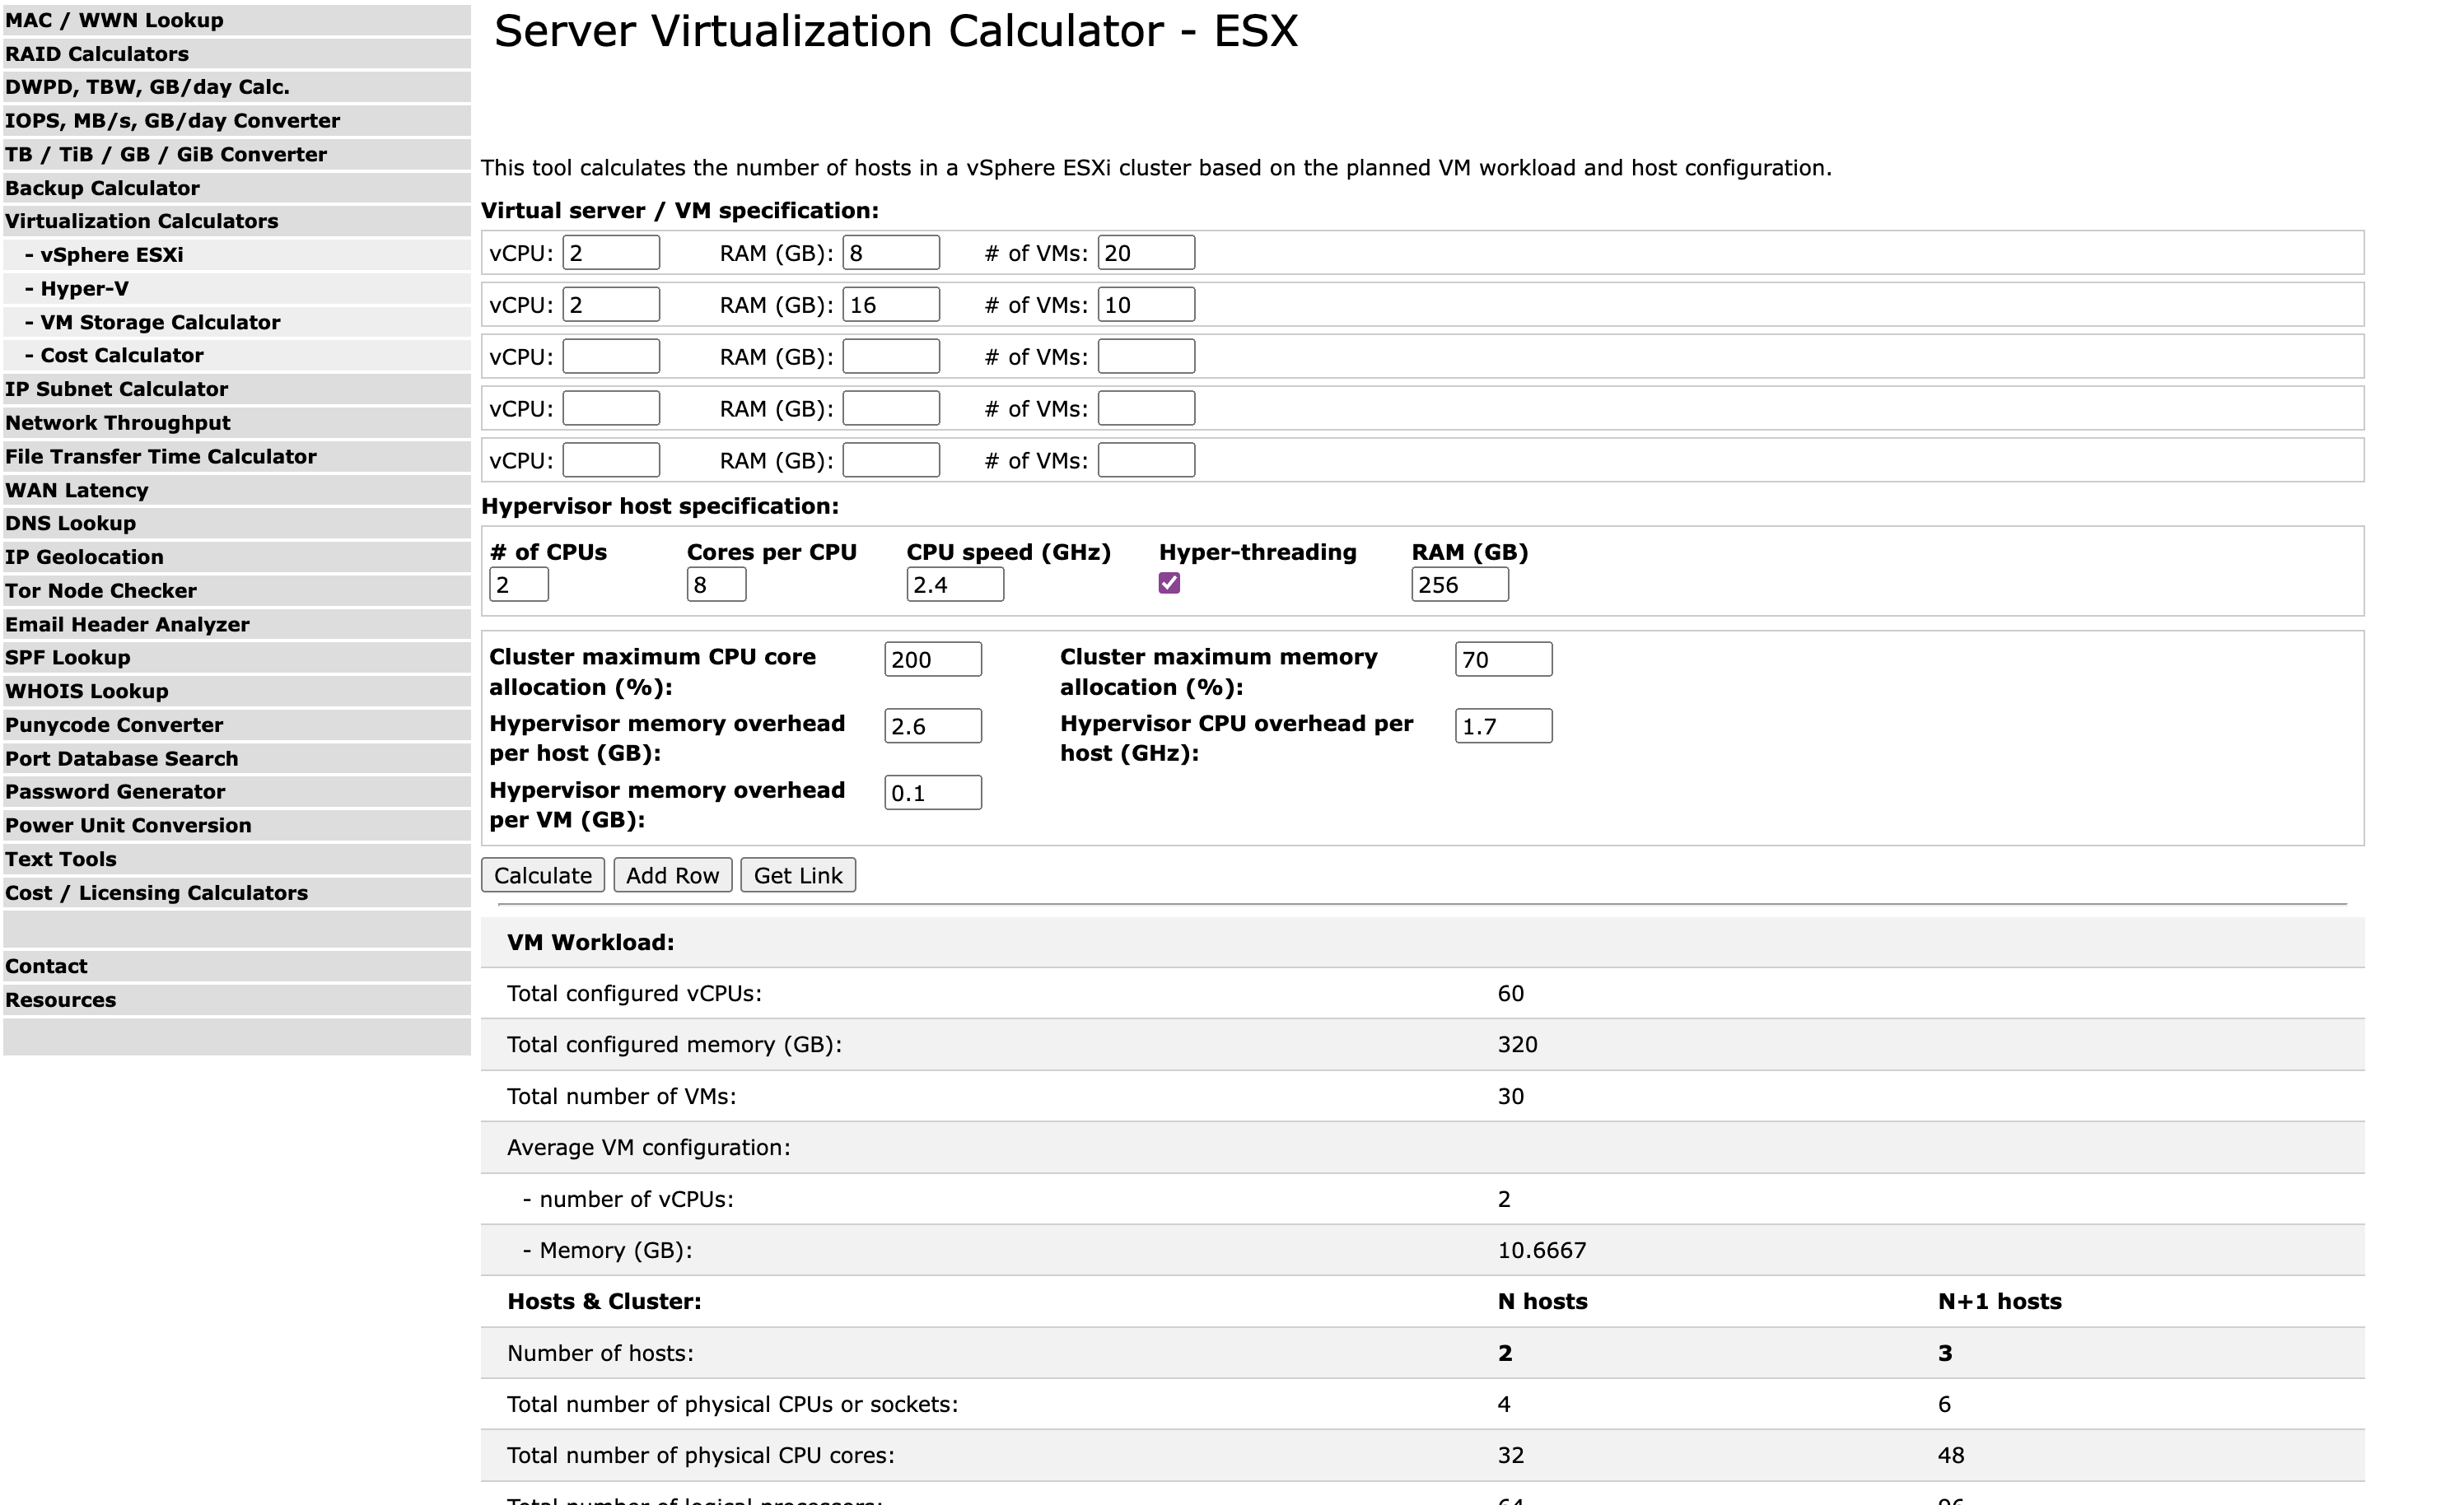 A screenshot of wintelguy.com's "Server Virtualization Calculator" for ESX servers. It's very complex, with multiple entry fields for: vCPU, RAM, # of VMs, the cores per CPU, the cluster maximum CPU core, and more.